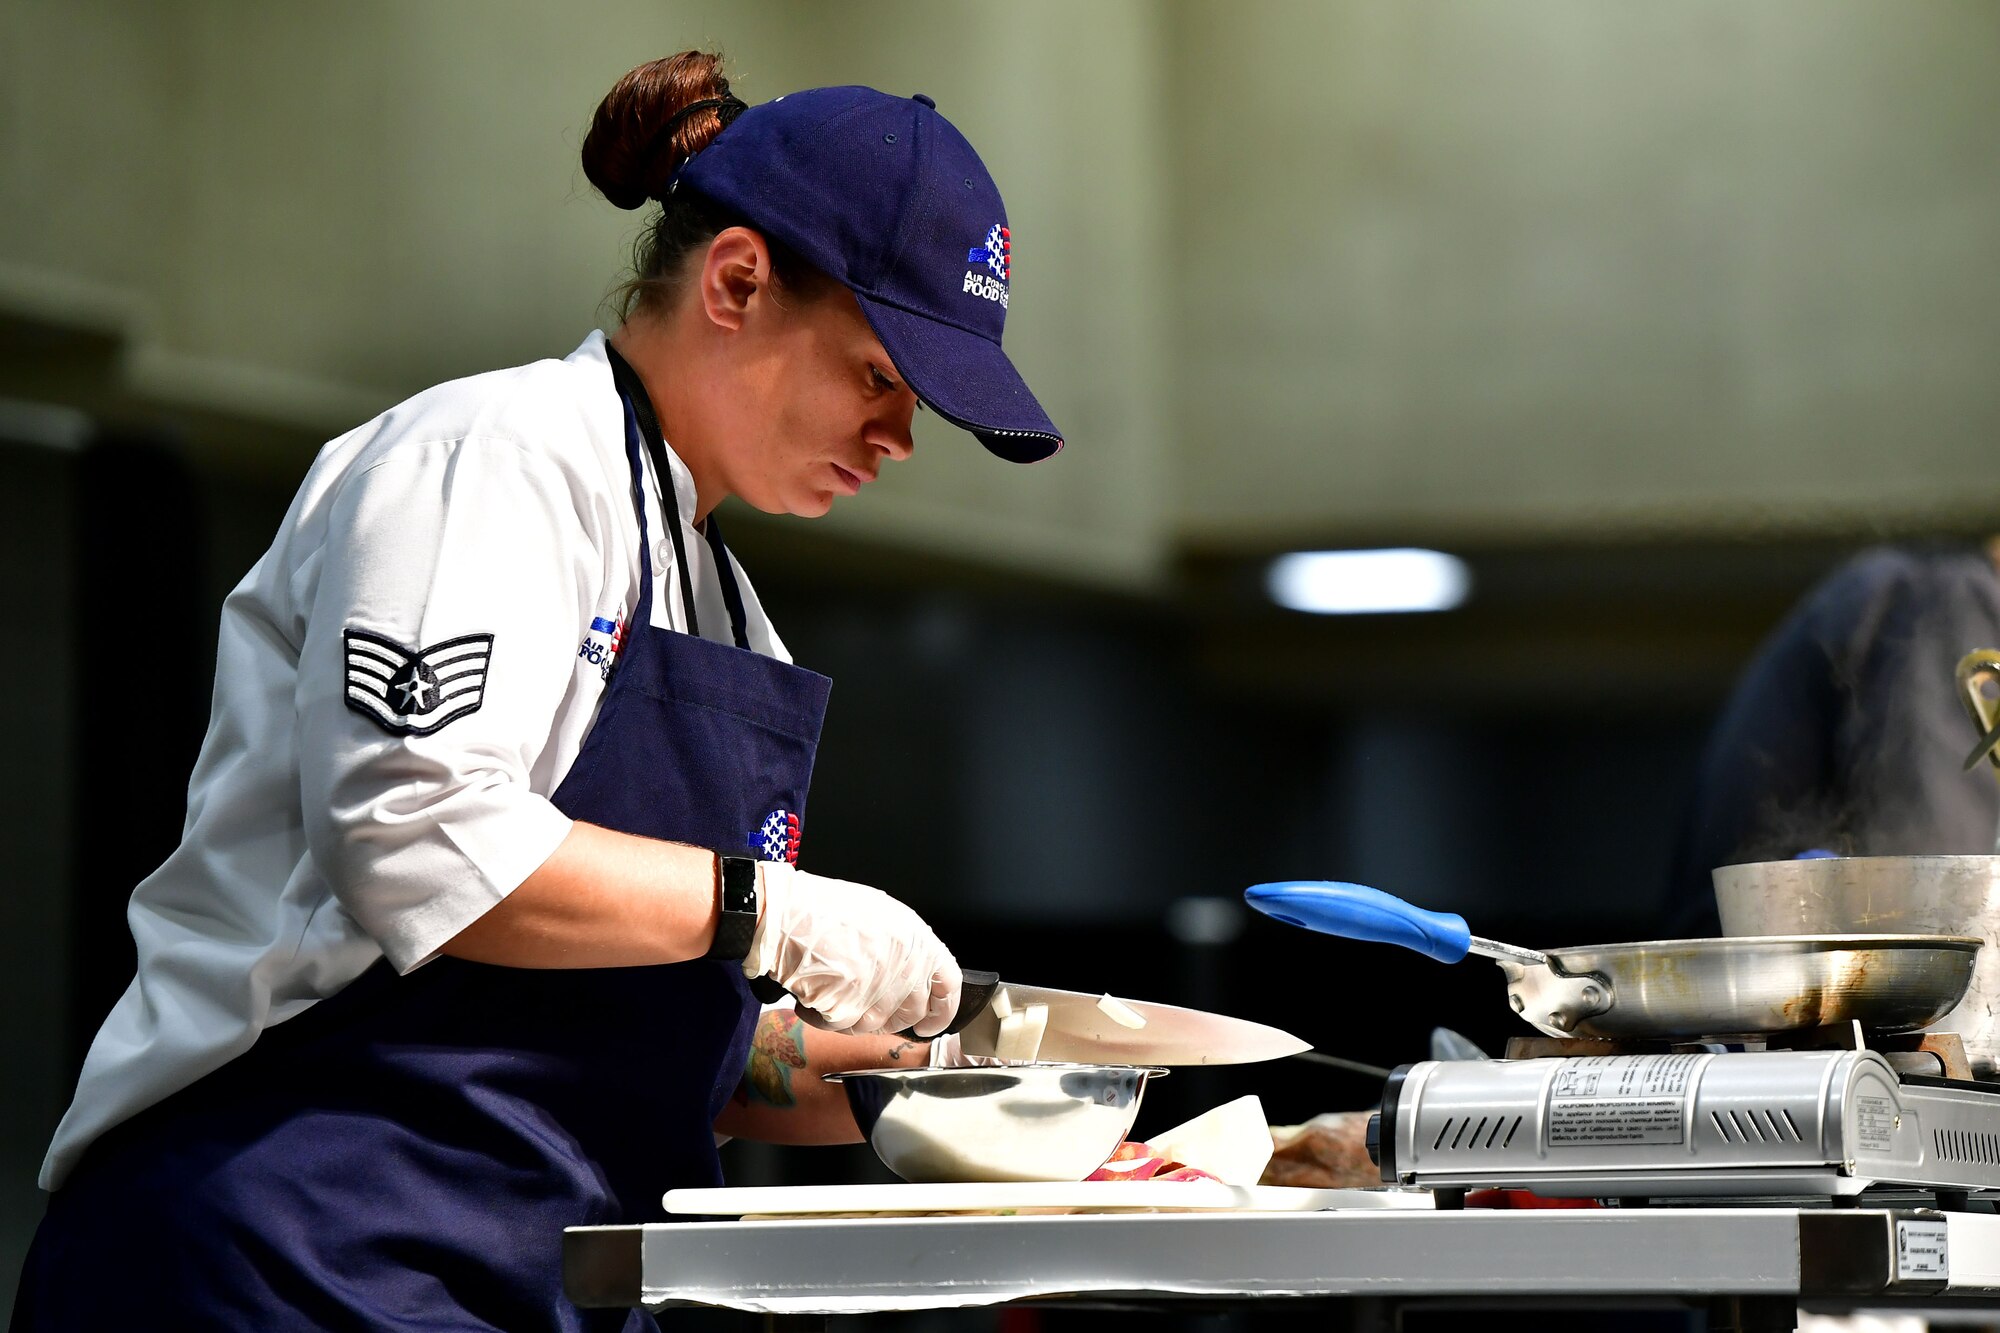 An Airman chops onions during the Iron Chef Championship competition